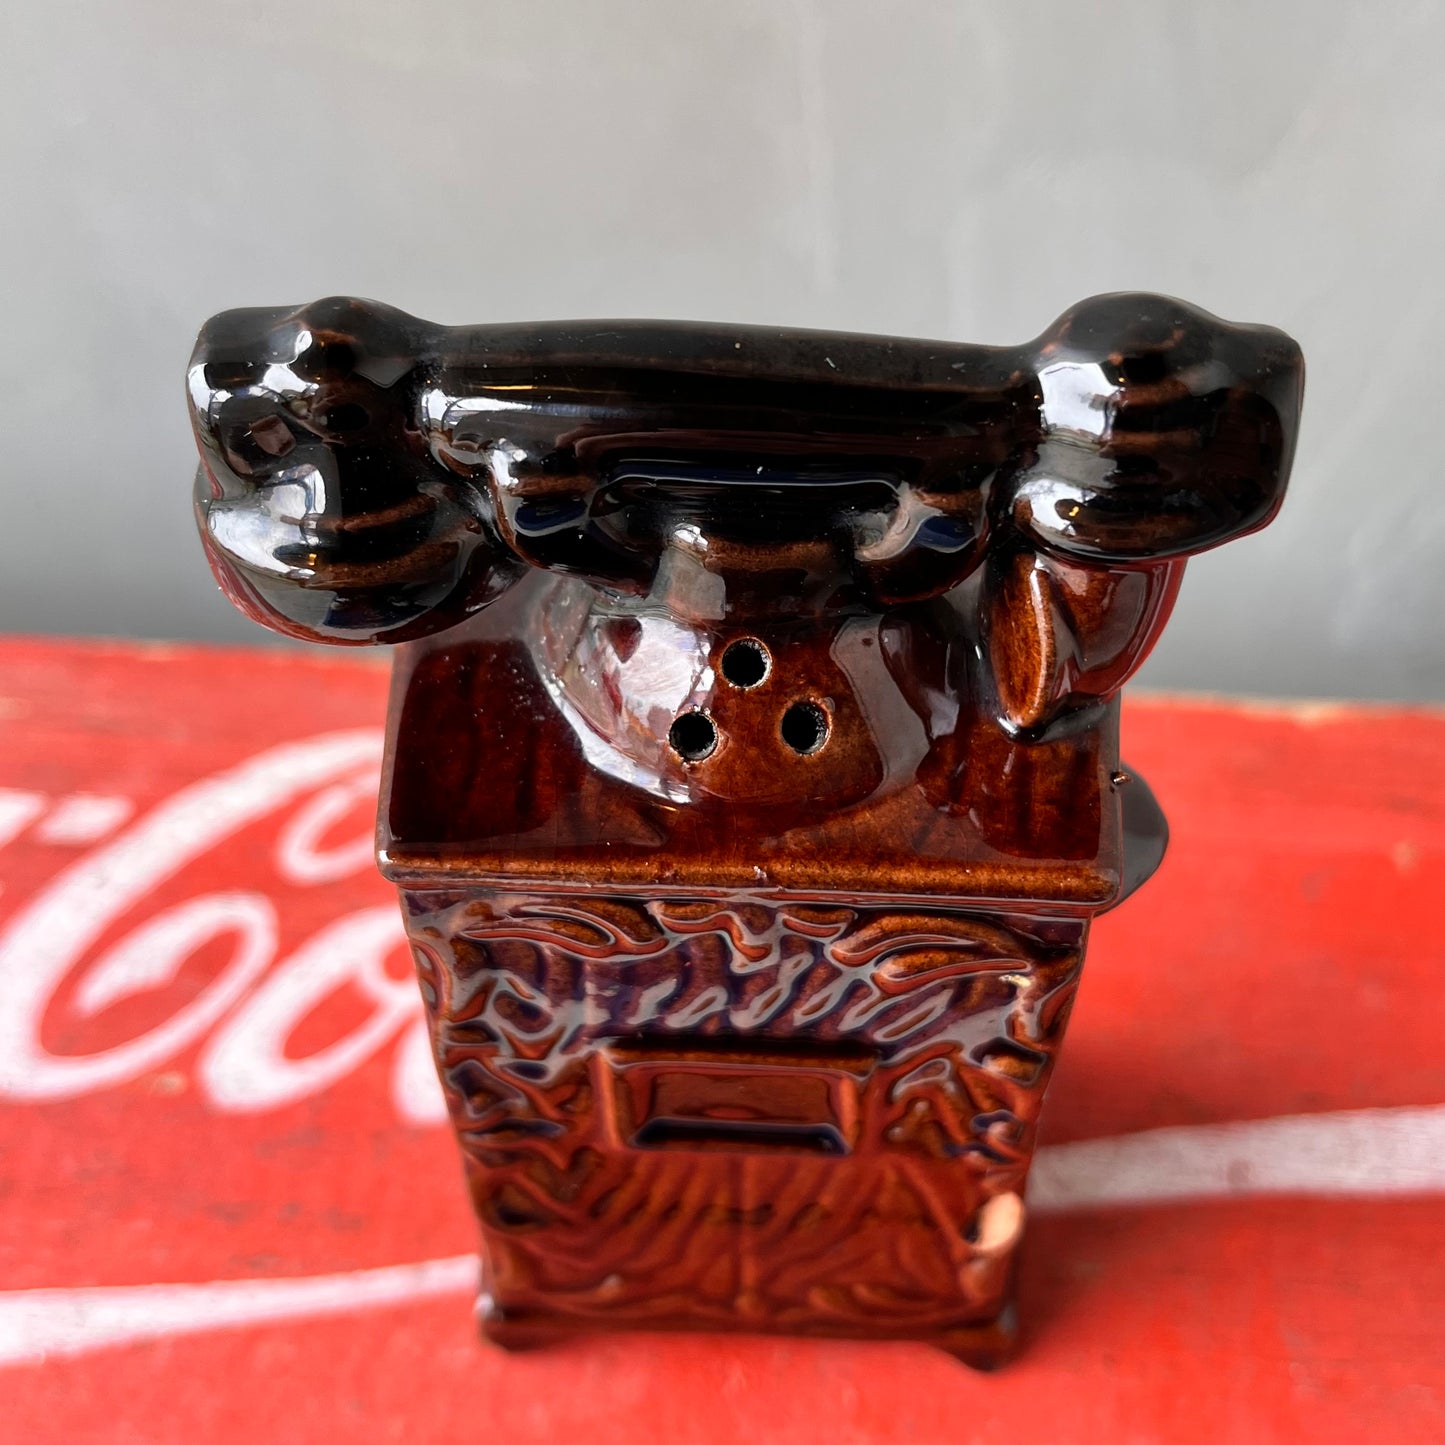 【USA vintage】Sioux Trading Post Telephone Salt and Pepper Shakers